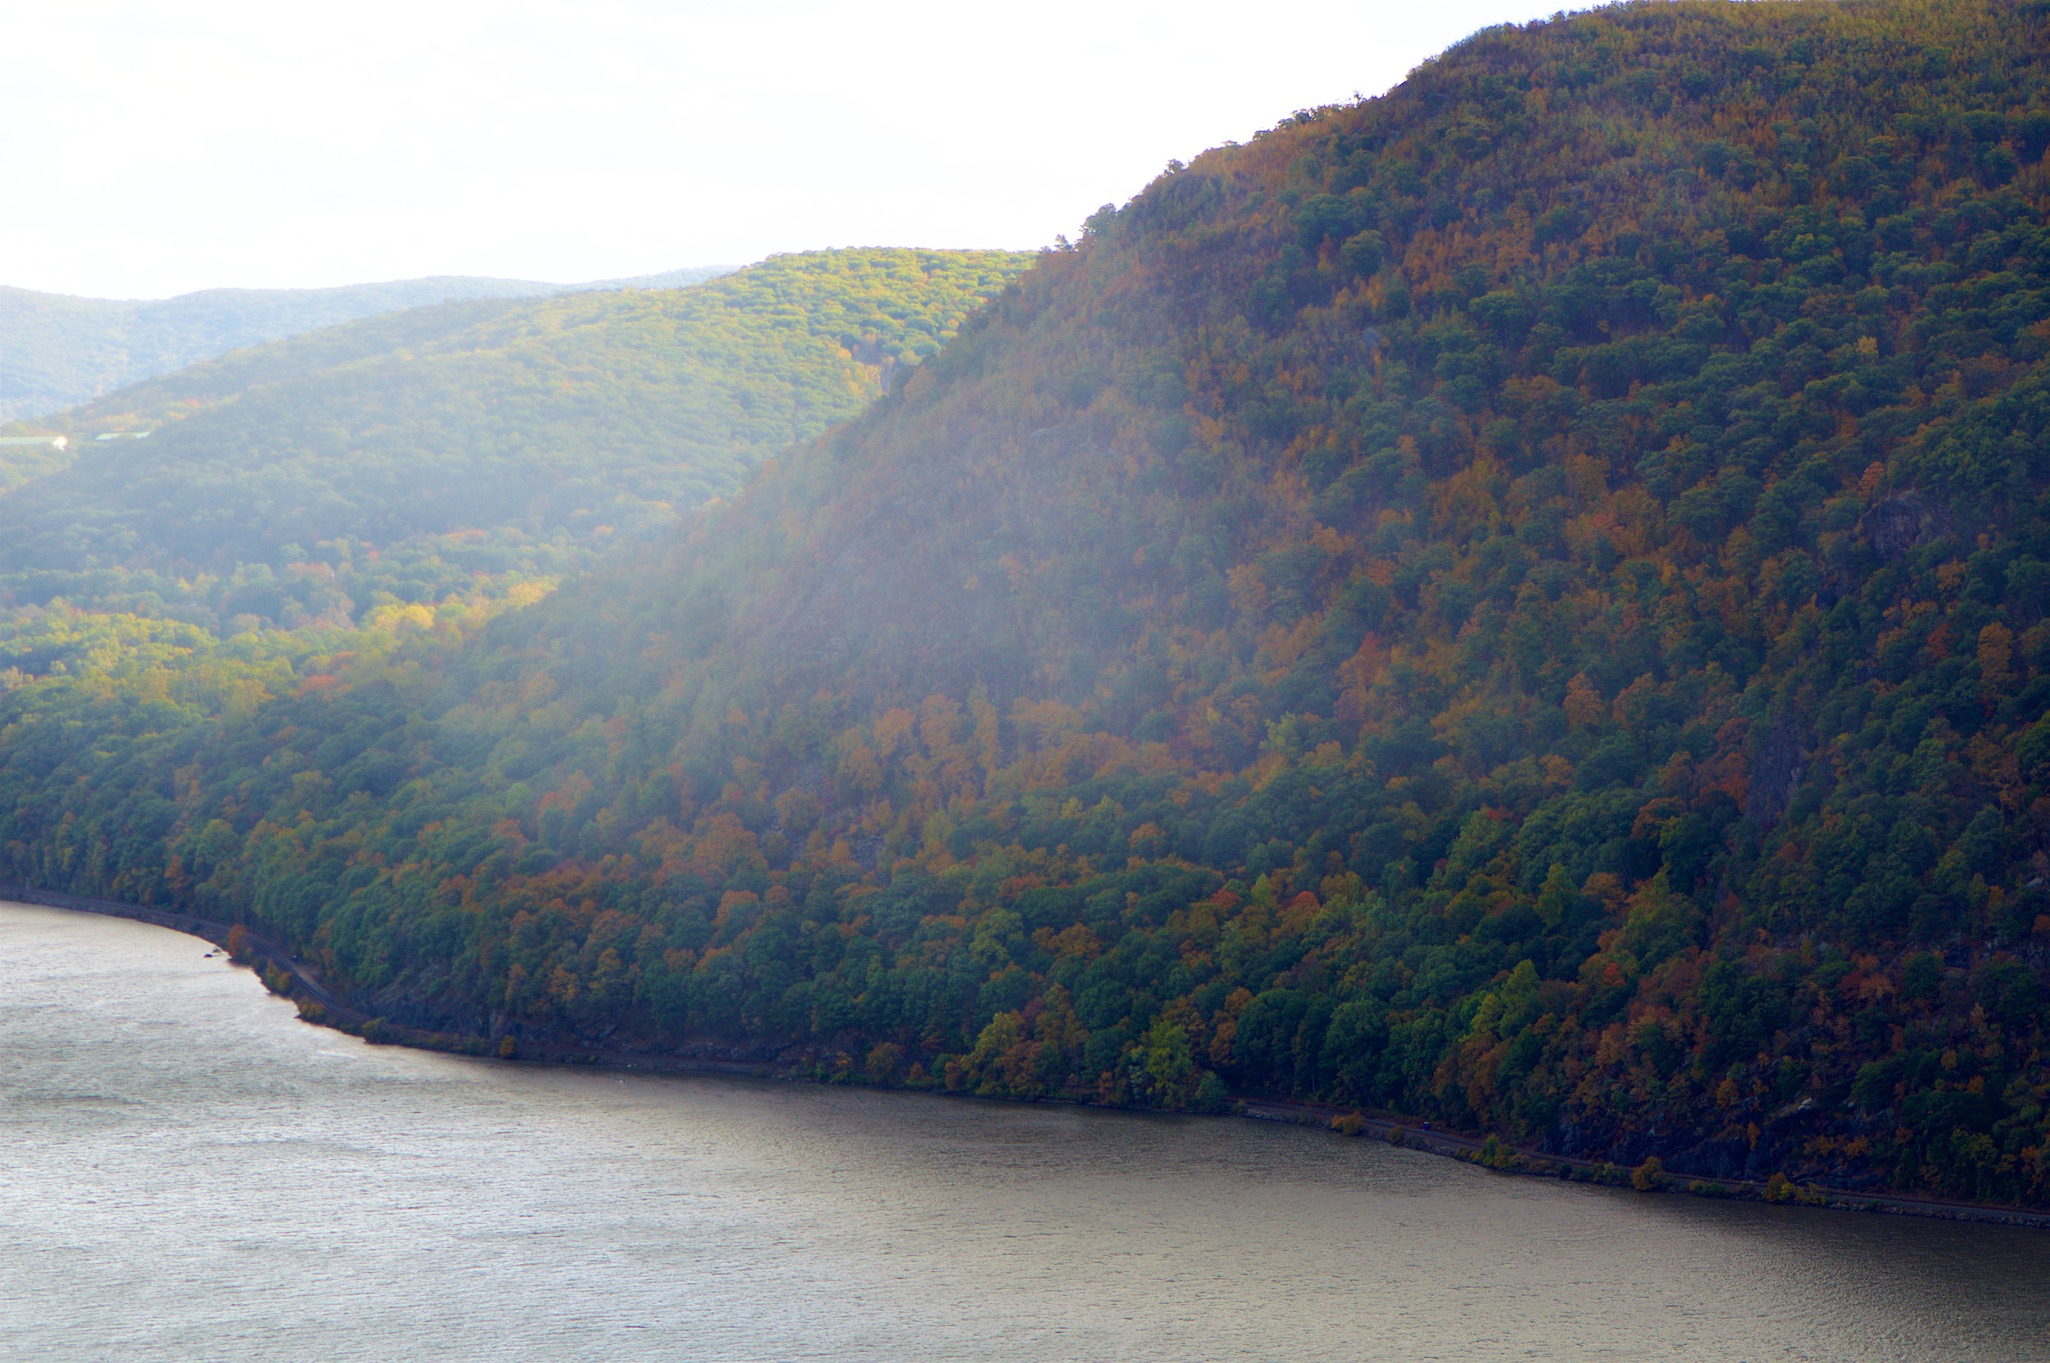 View of Fall Foliage and Hudson River from the top of Breakneck Ridge, New York